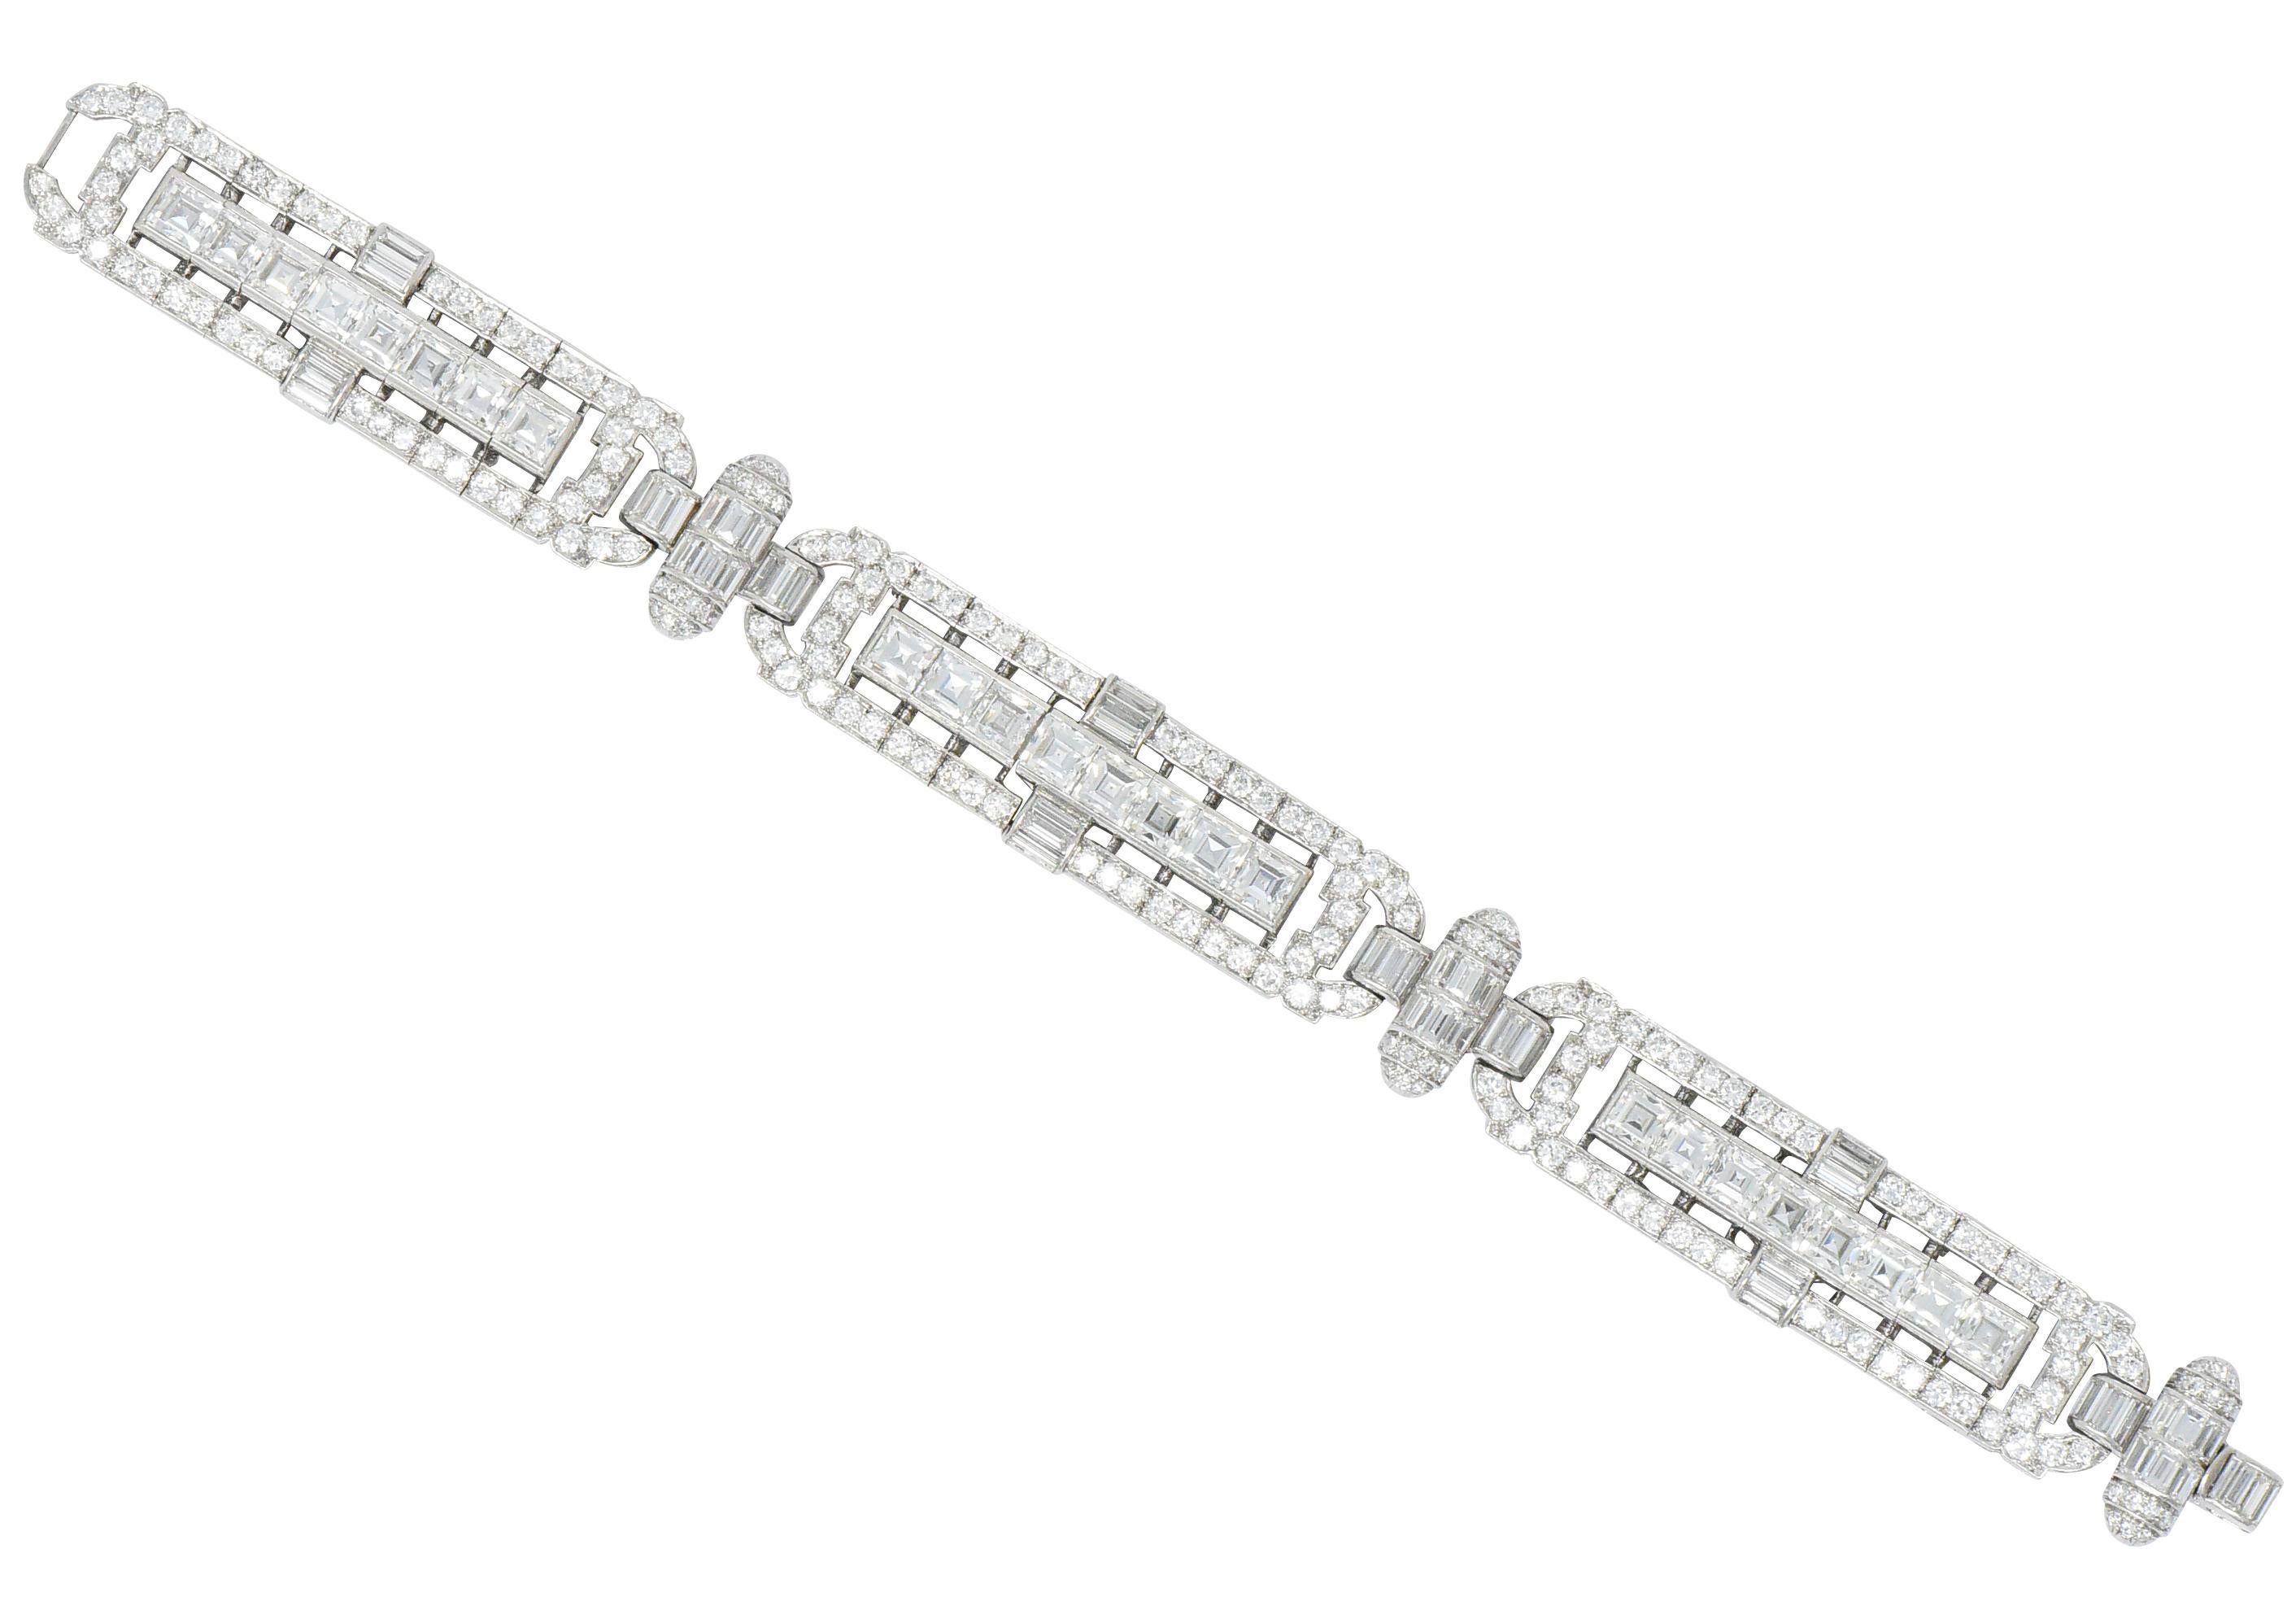 Featuring 3 sections each centering channel set asscher cut diamonds

24 diamonds weighing approximately 0.50 carat each and 12.00 carats total

Accented by round brilliant cut diamonds and channel set straight baguette cut diamonds weighing